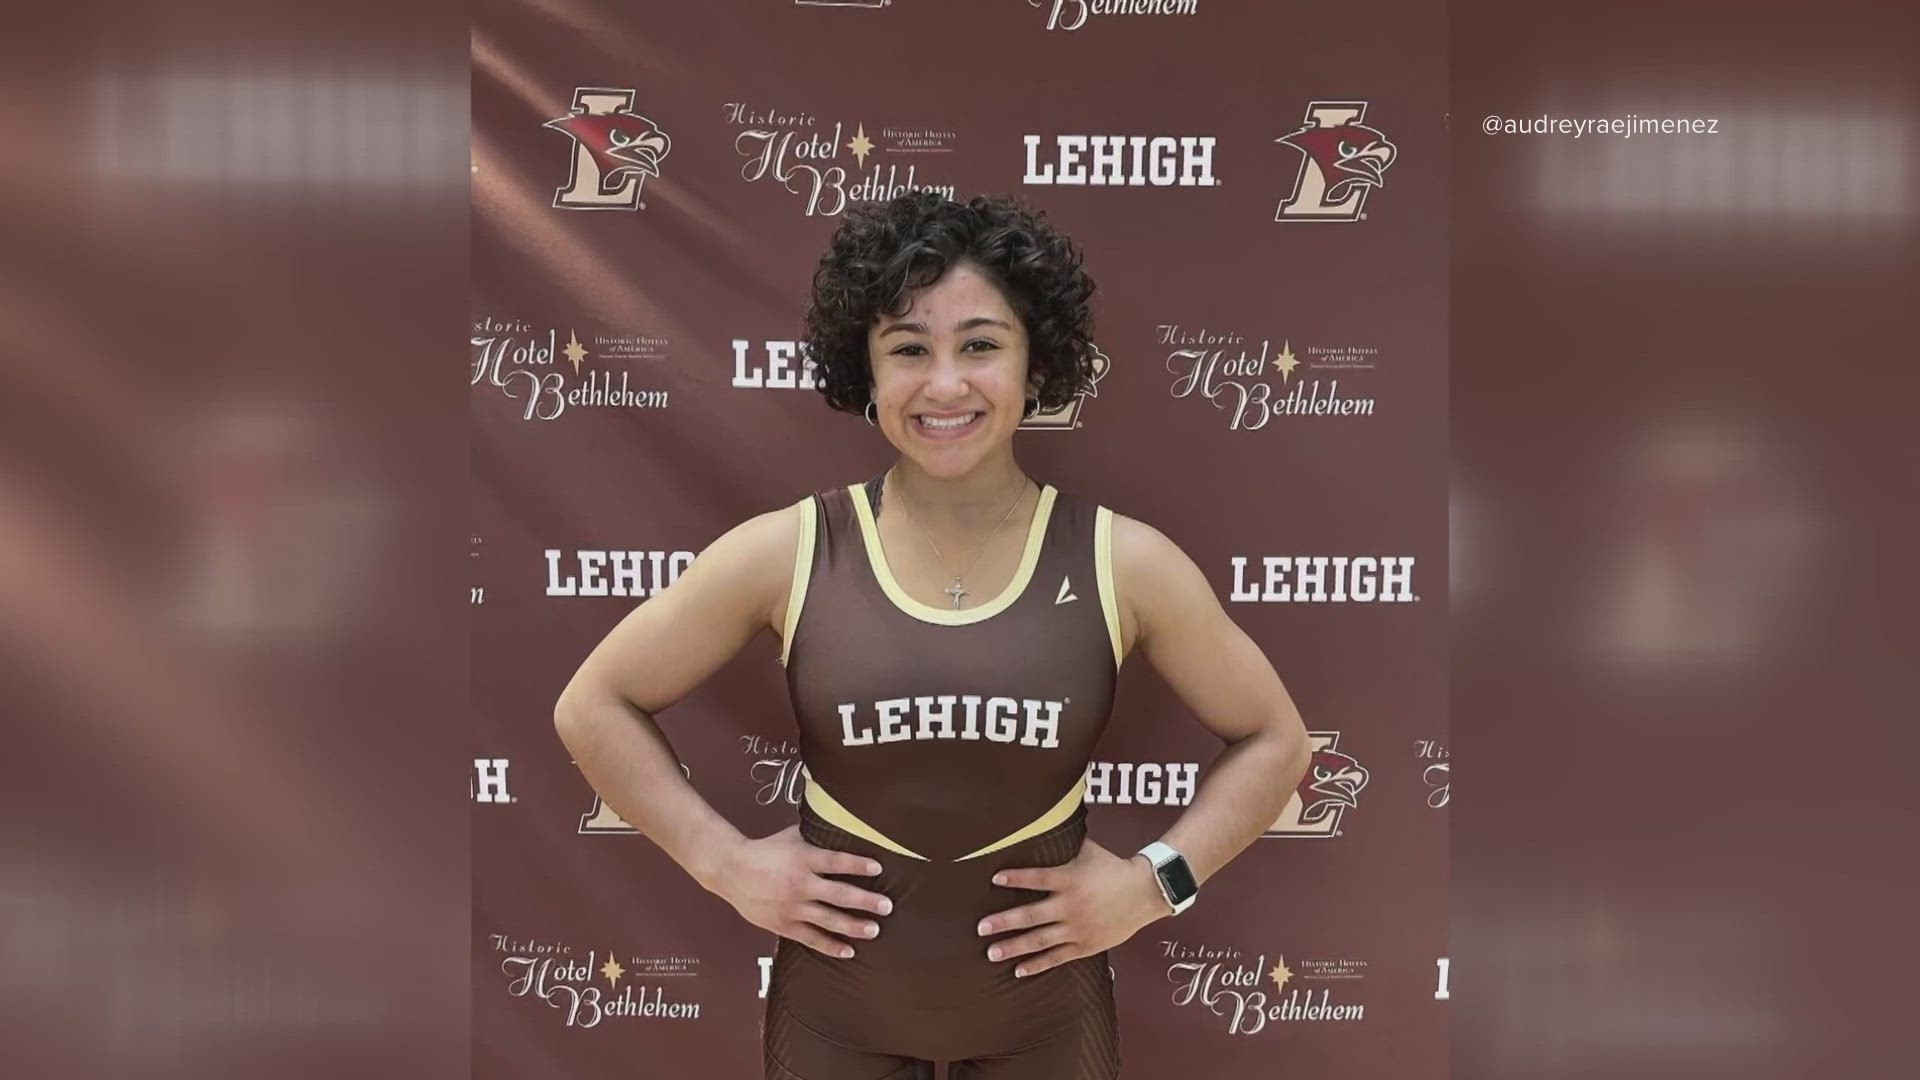 Audrey Jimenez is a wrestler from Sunnyside and is making history on the mat. She also has hopes to represent Team USA at the 2024 Olympics in Paris.